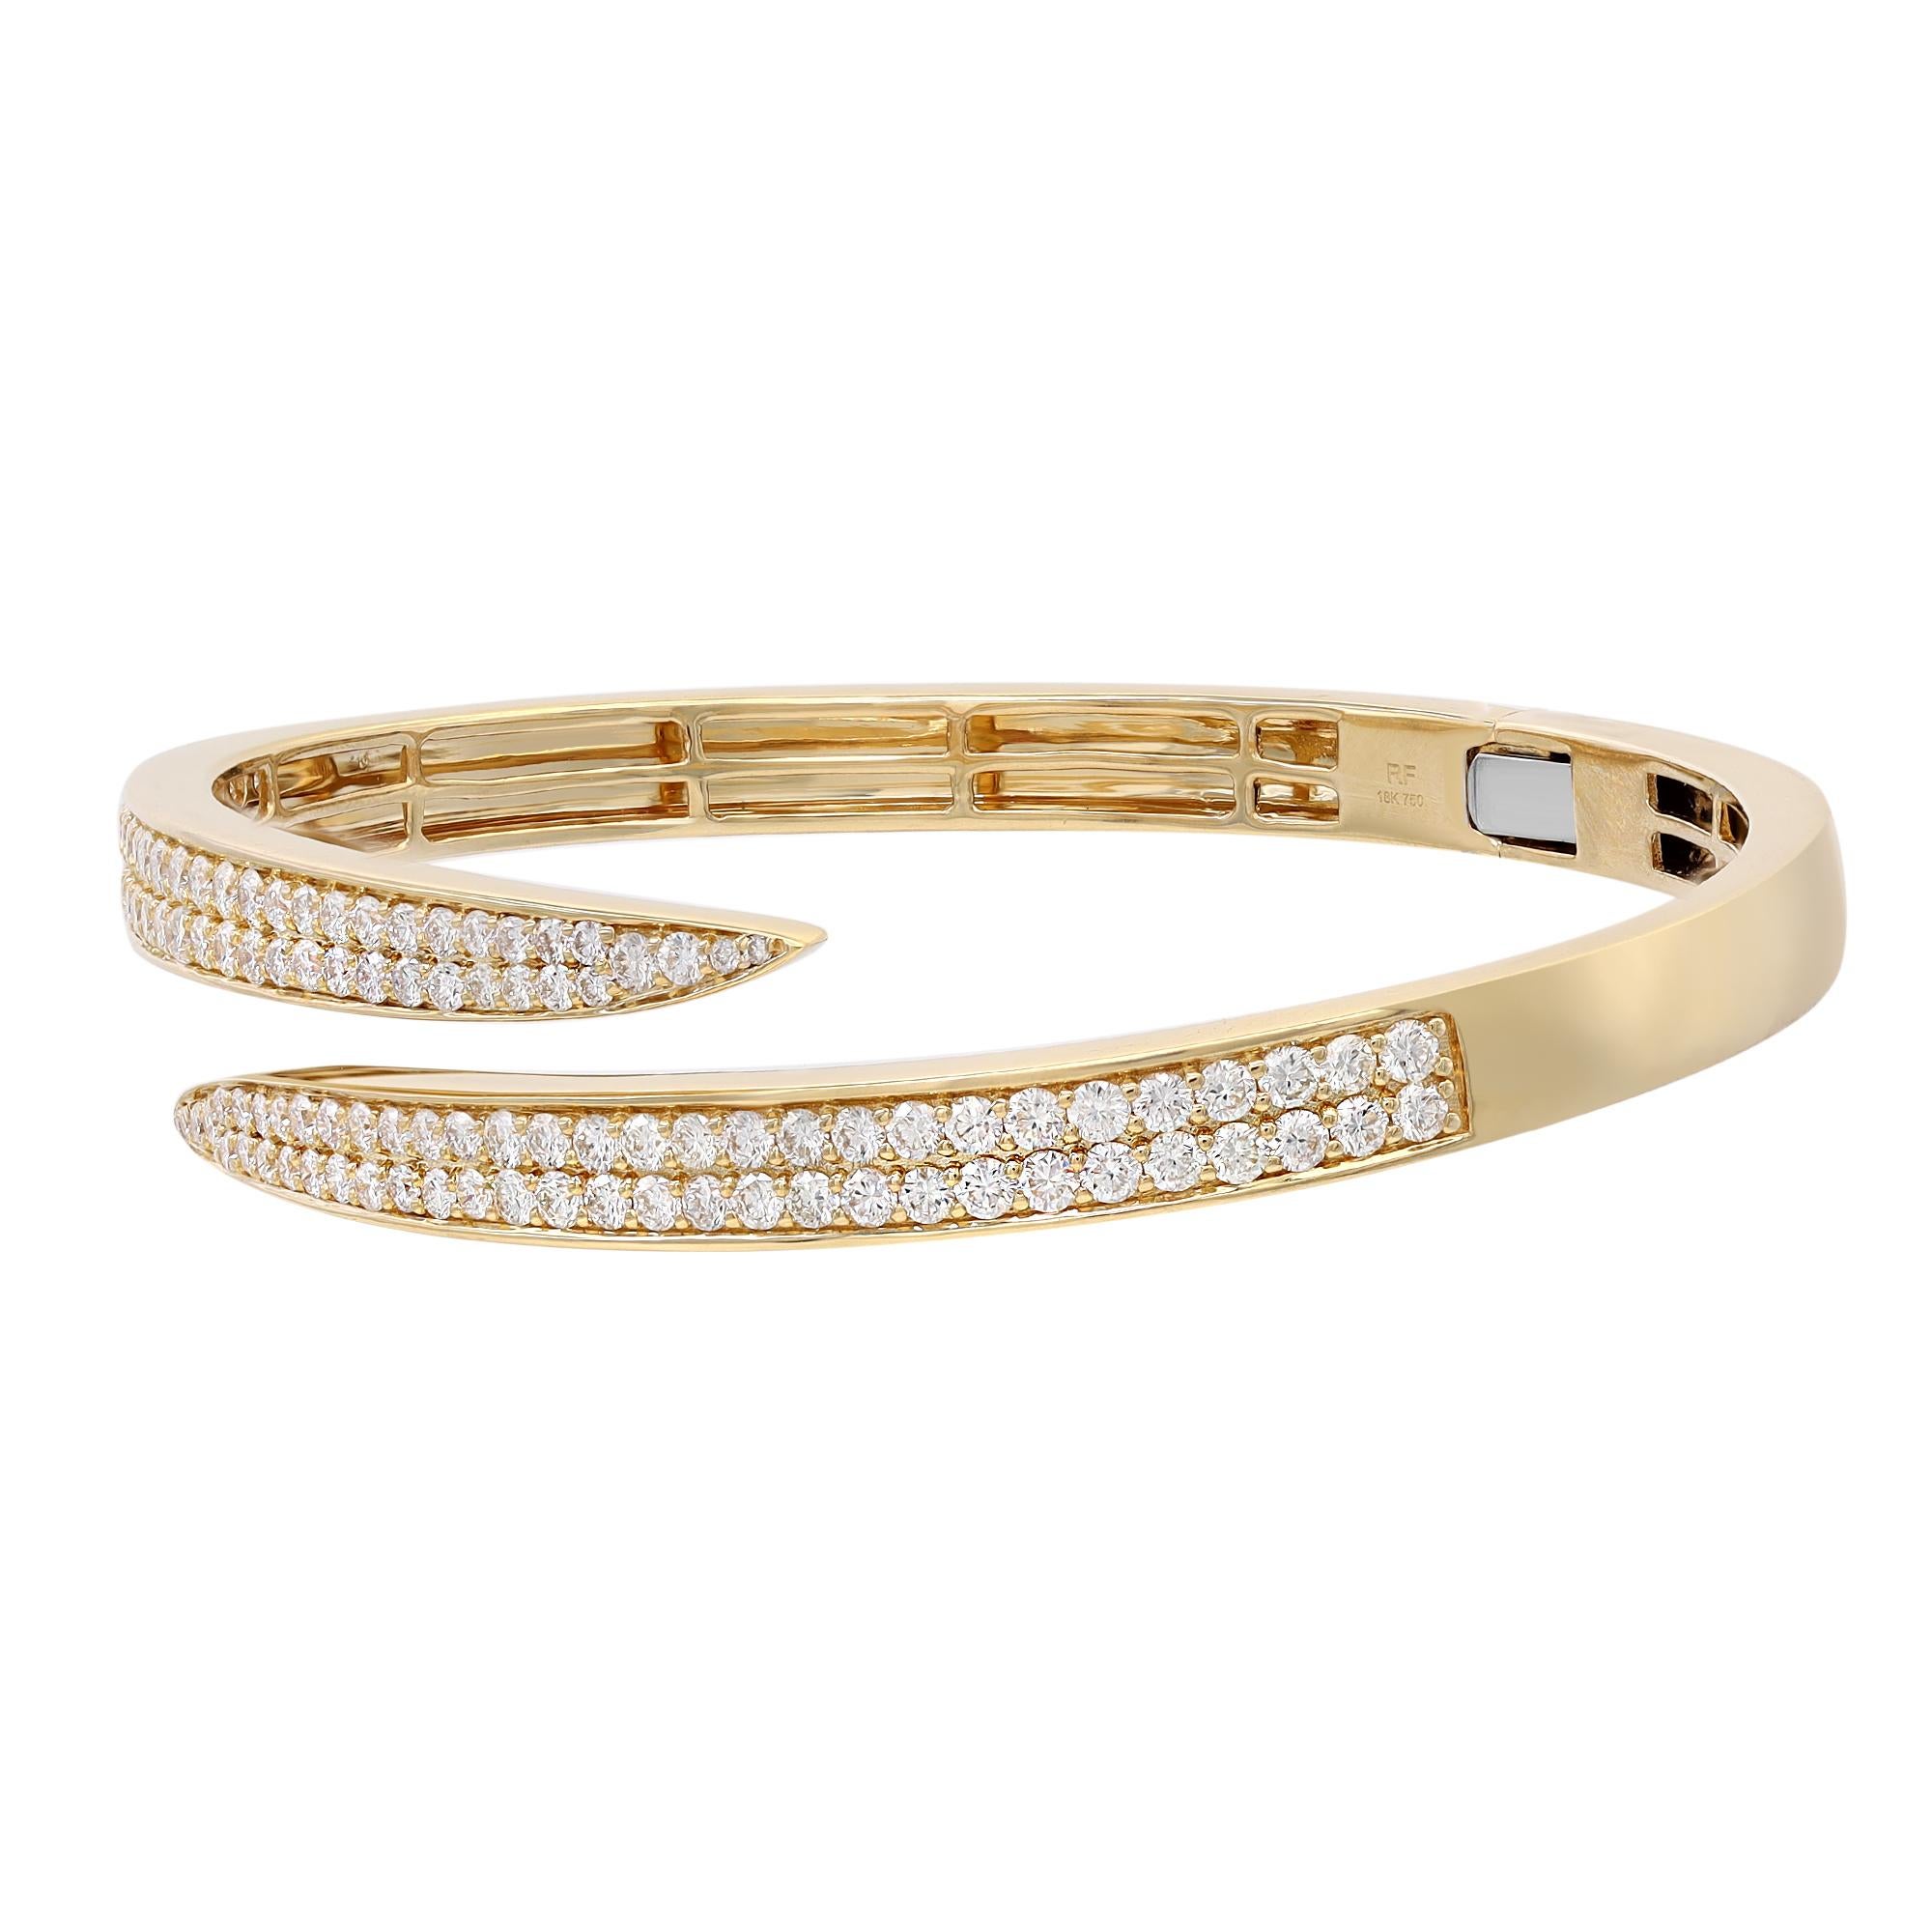 Let your style shine with this classic and elegant diamond bangle bracelet. Encrusted with pave set bright white natural round cut diamonds set halfway through the bangle. Crafted in fine high polished 18k yellow gold. The total diamond weight is